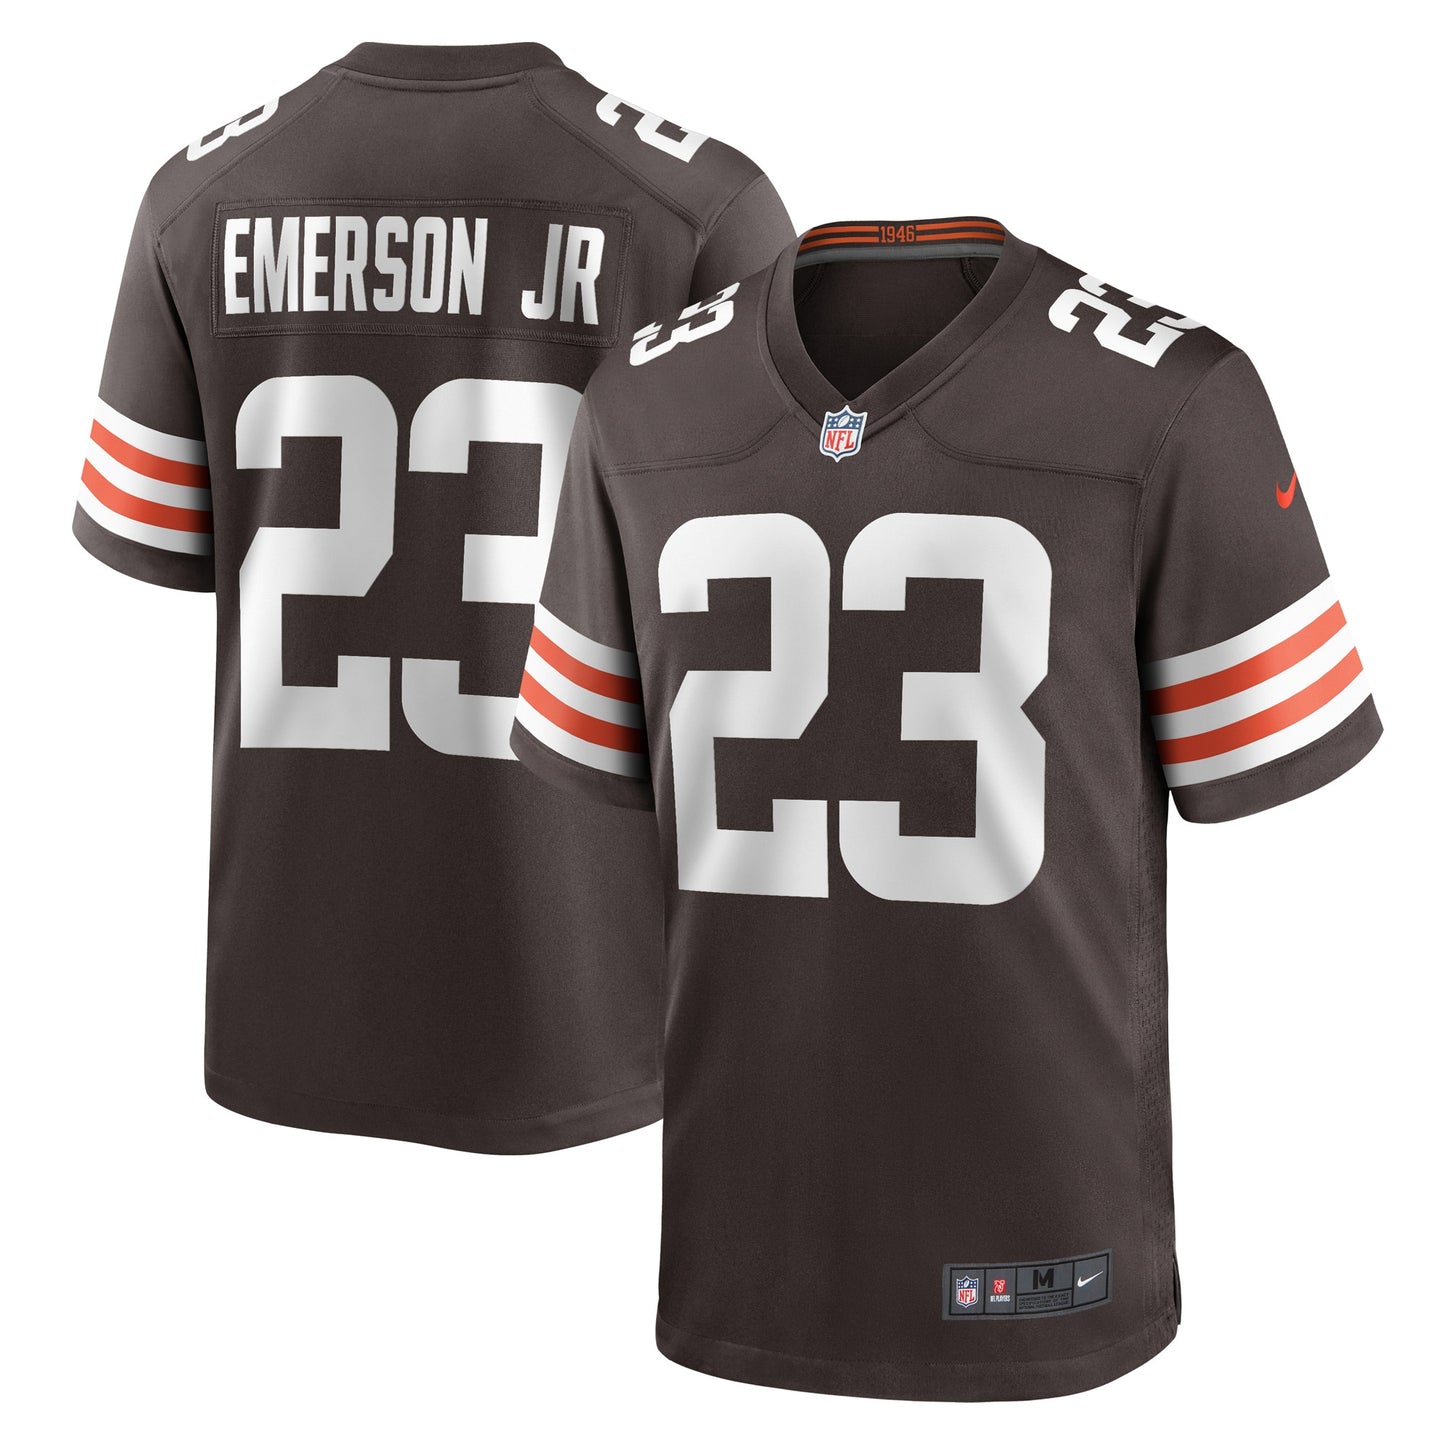 Martin Emerson Jr. Cleveland Browns Nike Game Player Jersey - Brown